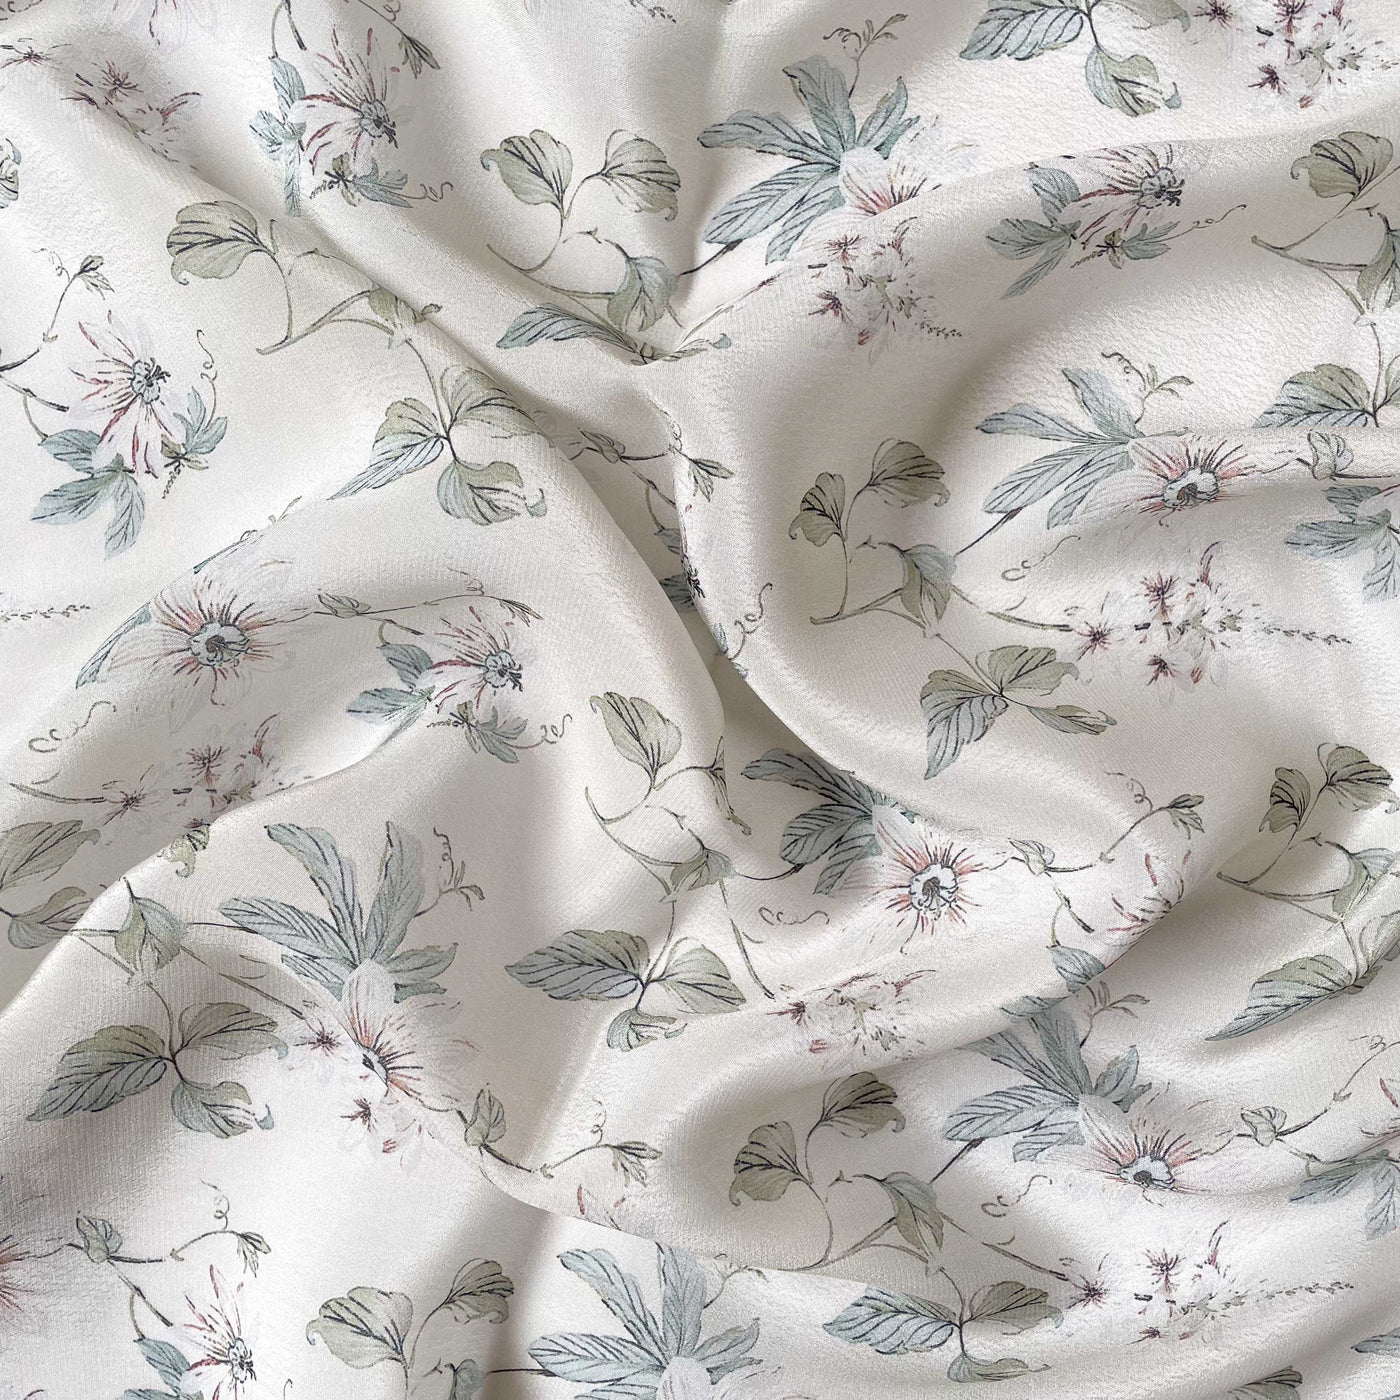 Fabric Pandit Fabric Pale White & Green Botanical Garden Digital Printed Pure Crepe Fabric (Width 43 Inches)